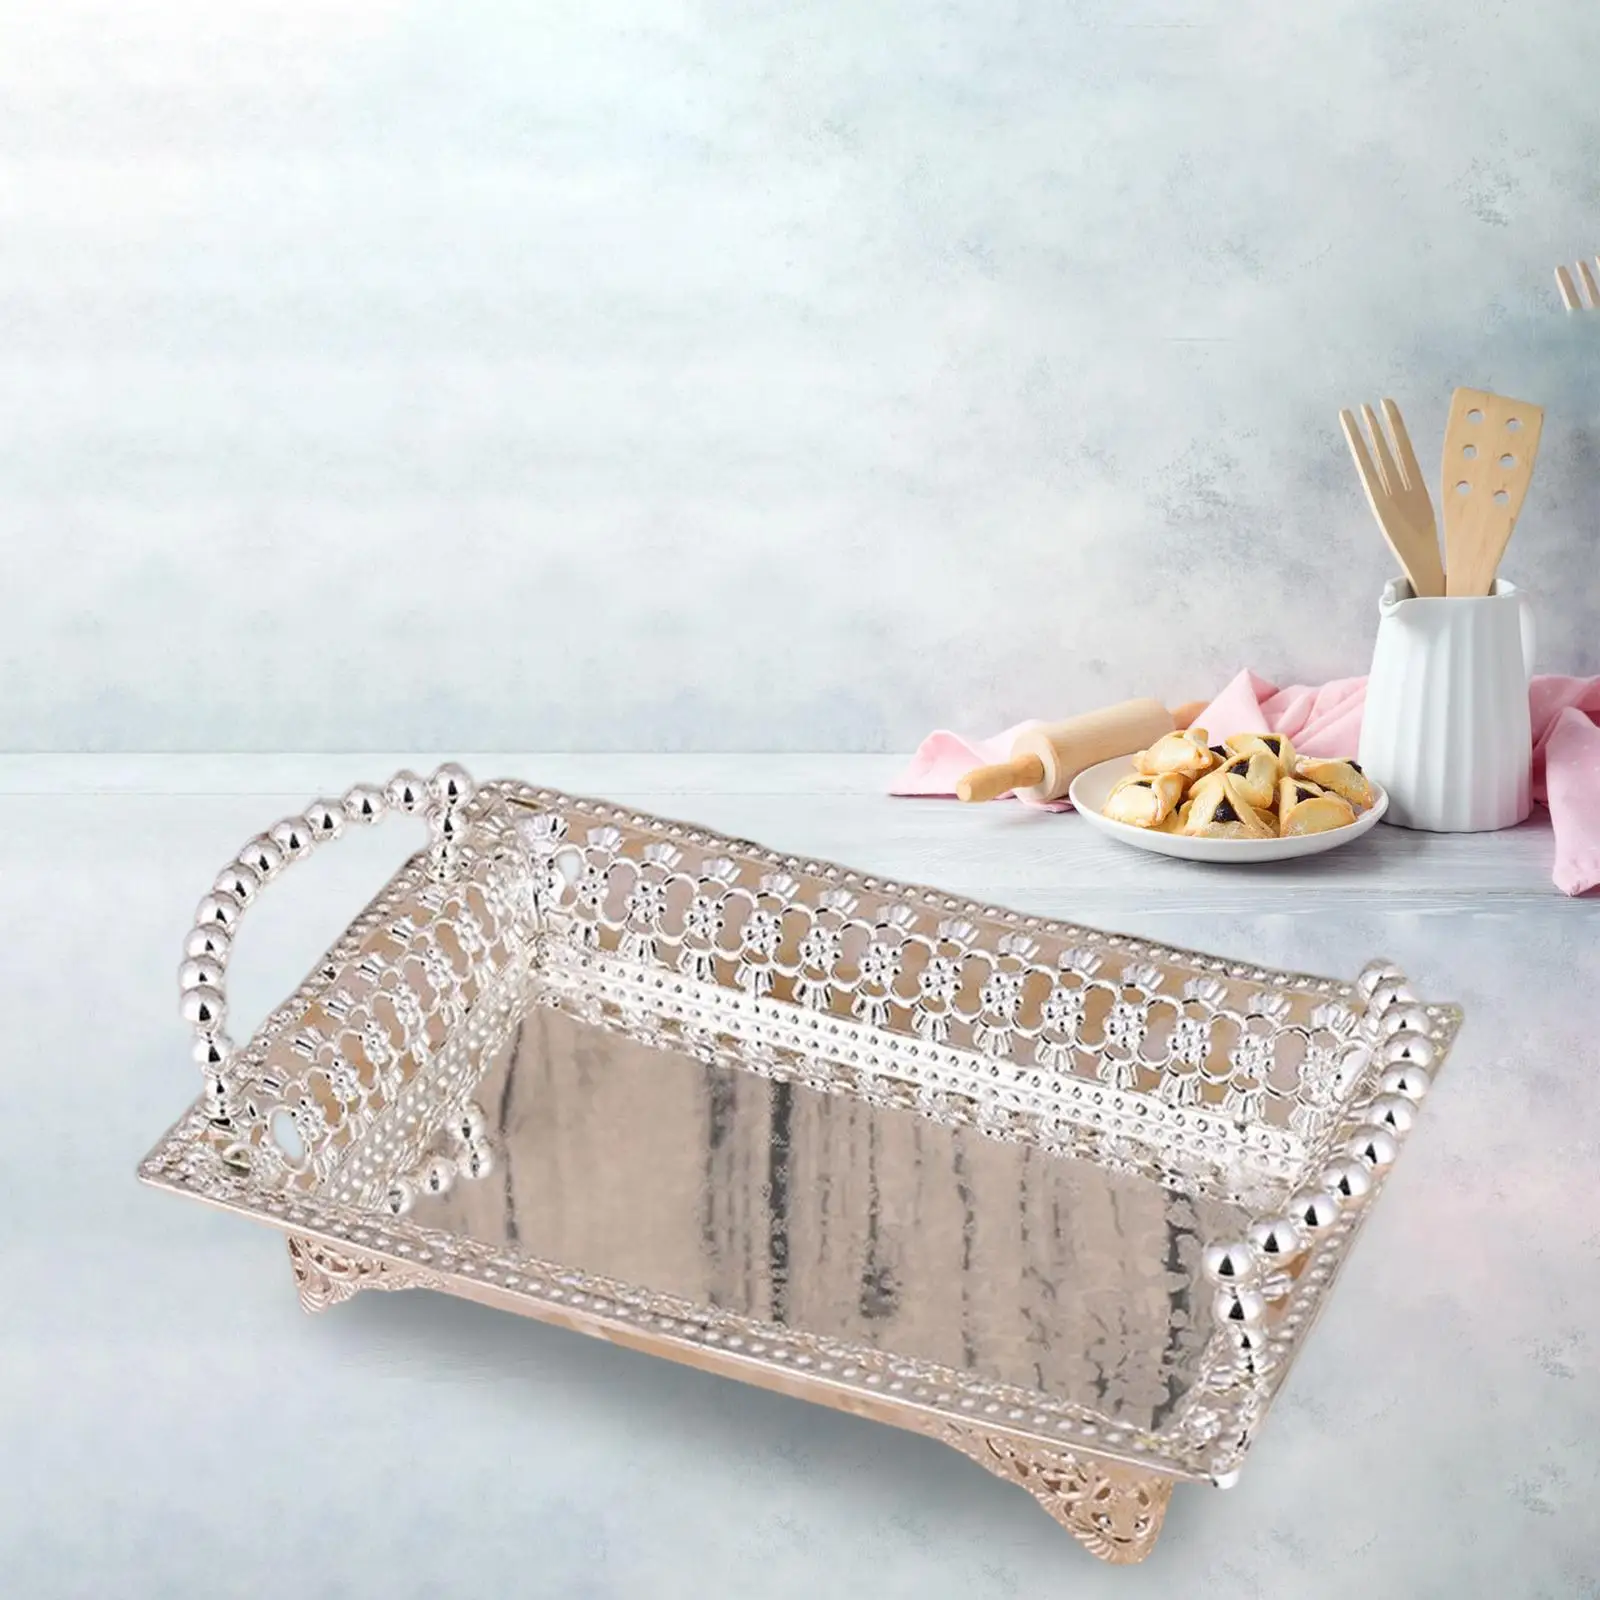 Dessert Cake Serving Tray Food Pastry Dessert Display Holder Jewelry Organizer Fruit Plates Decorative Serving Tray for Party